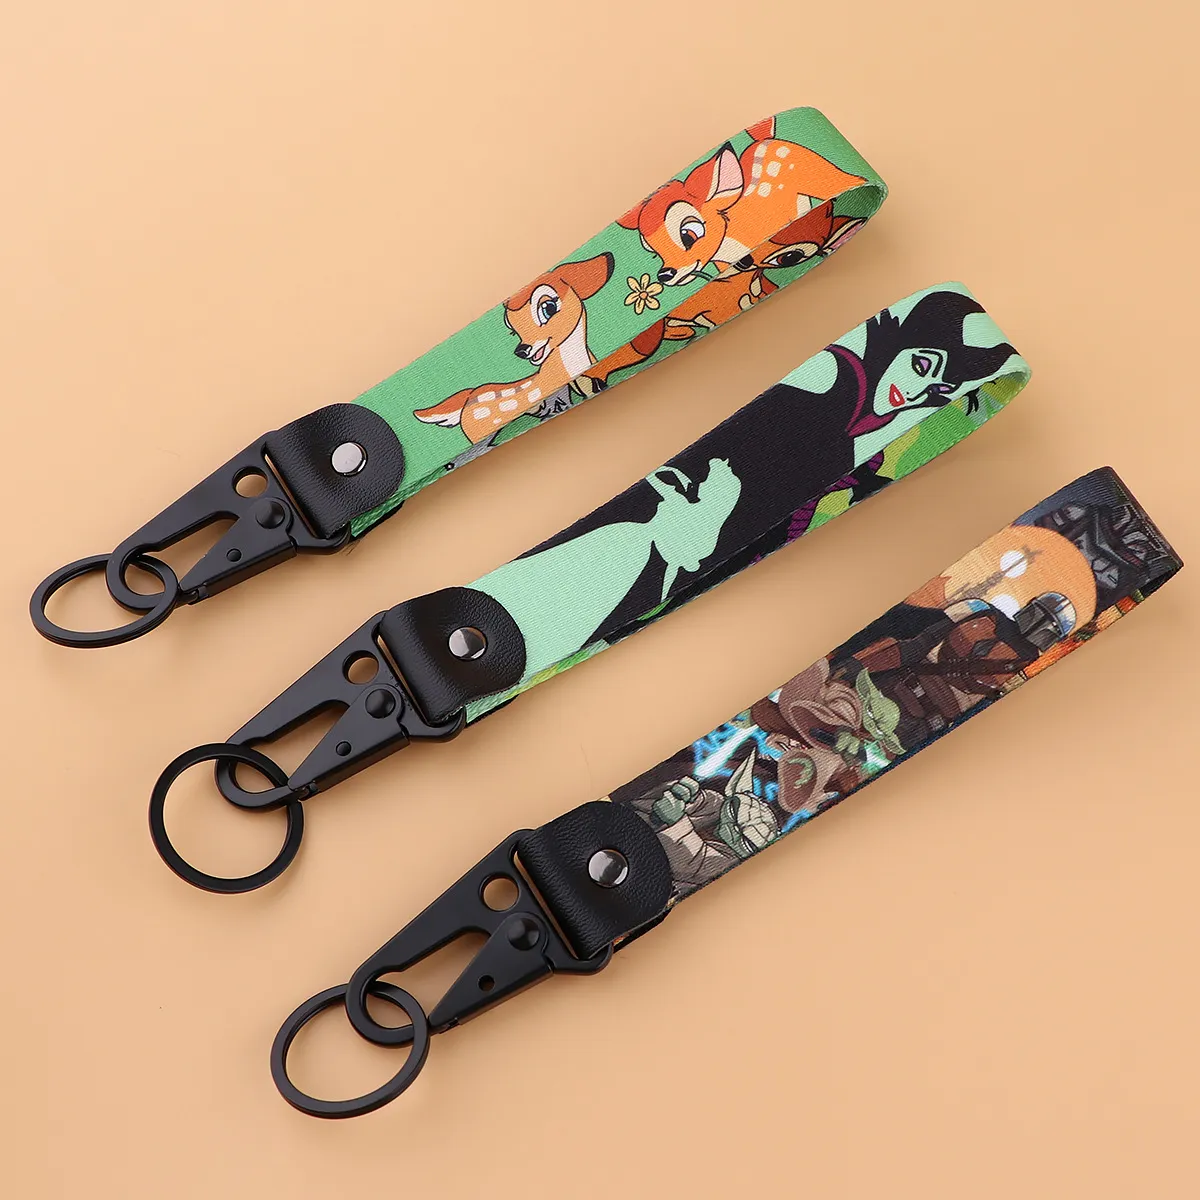 Keychains & Lanyards Various Types Of Cartoon Cool Key Tag Embroidery Fobs For Motorcycles Cars Bag Backpack Keychain Fashion Ring Gi Ottqx